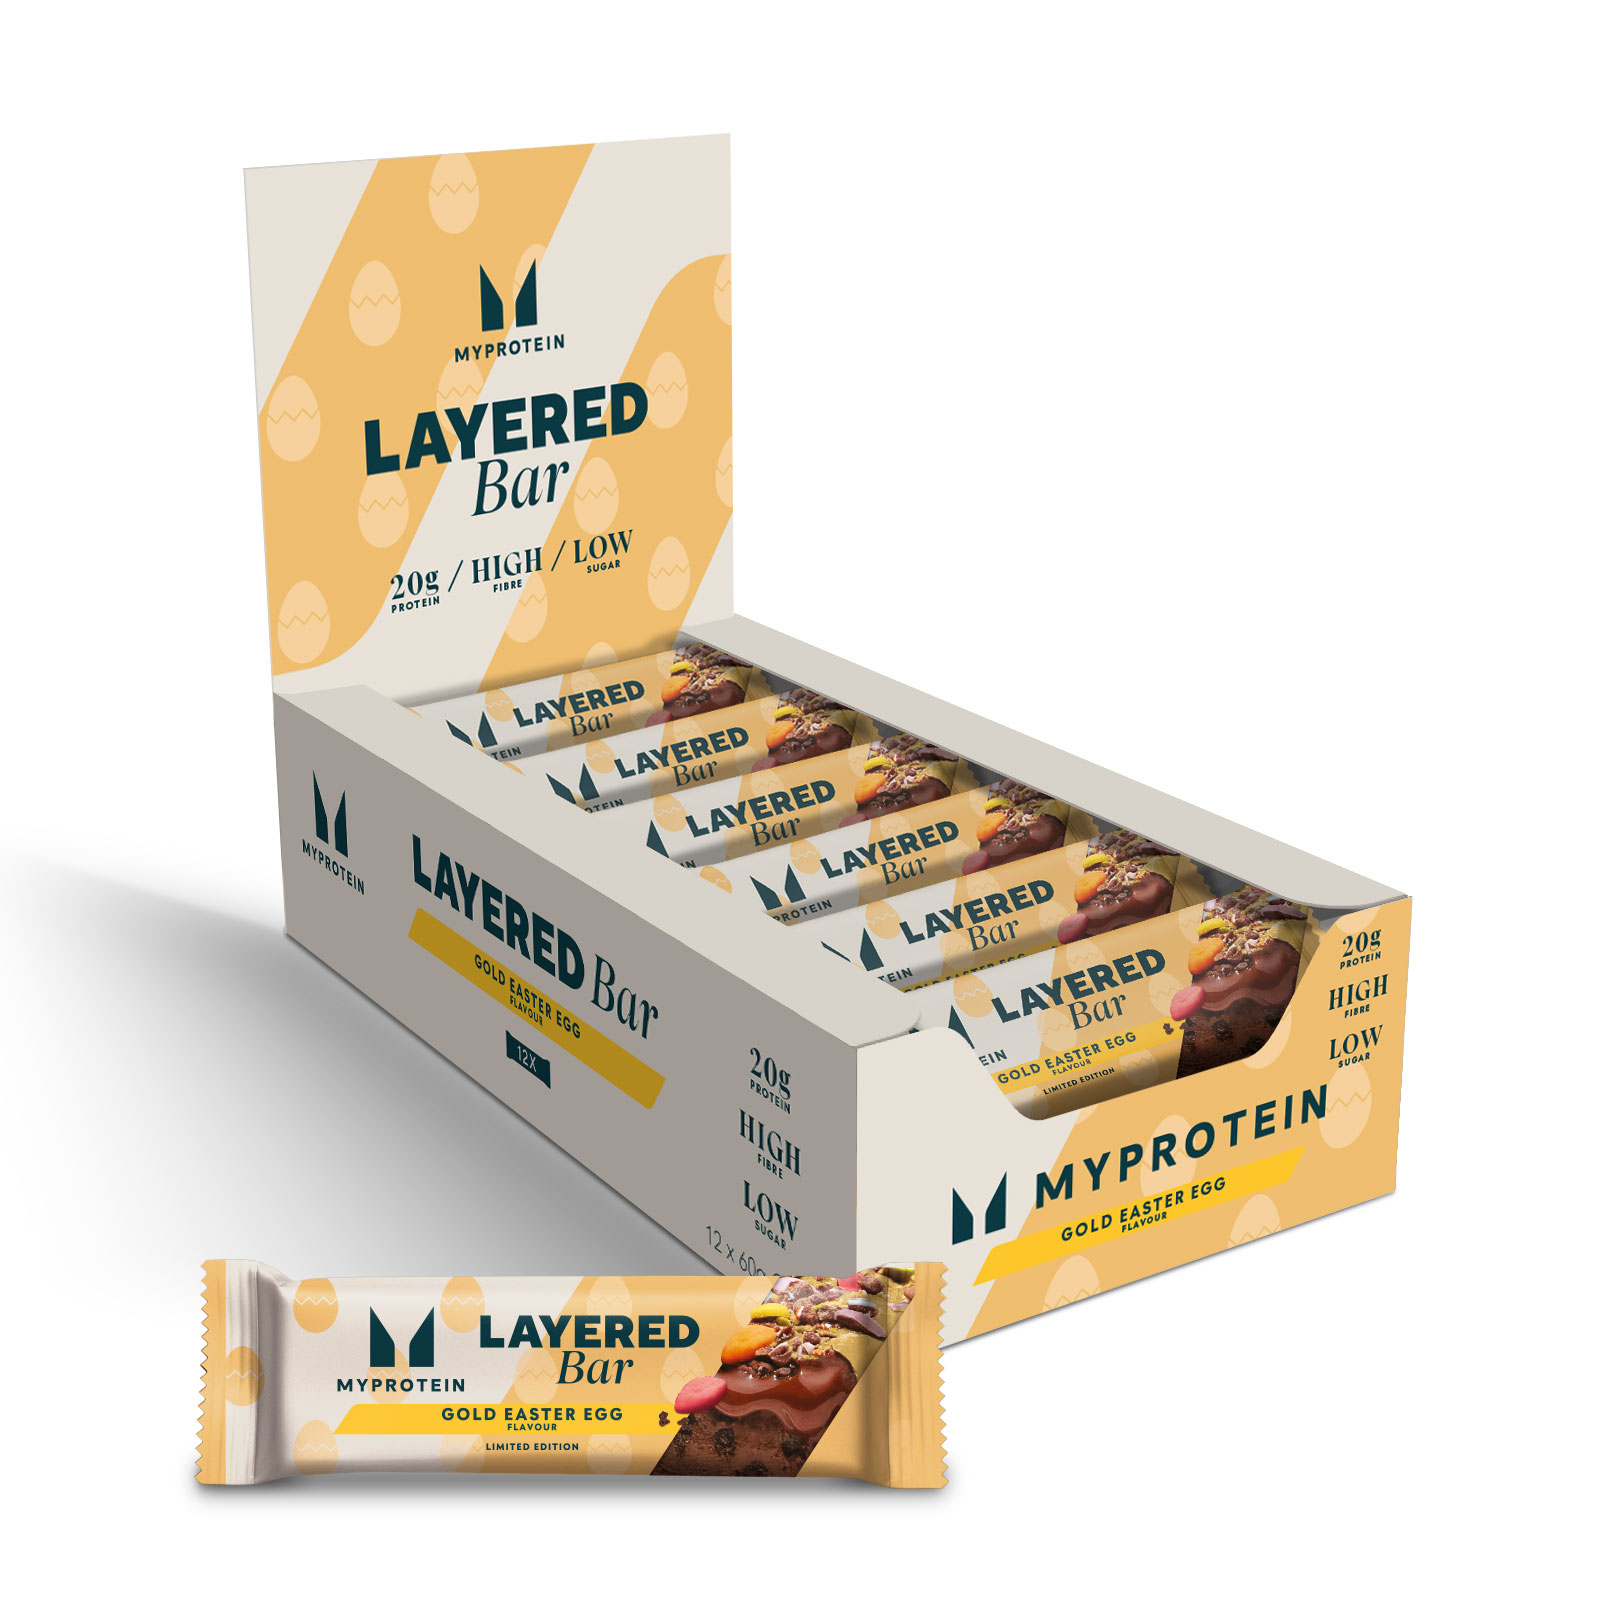 Limited Edition Layered Protein Bar - Gold Easter Egg